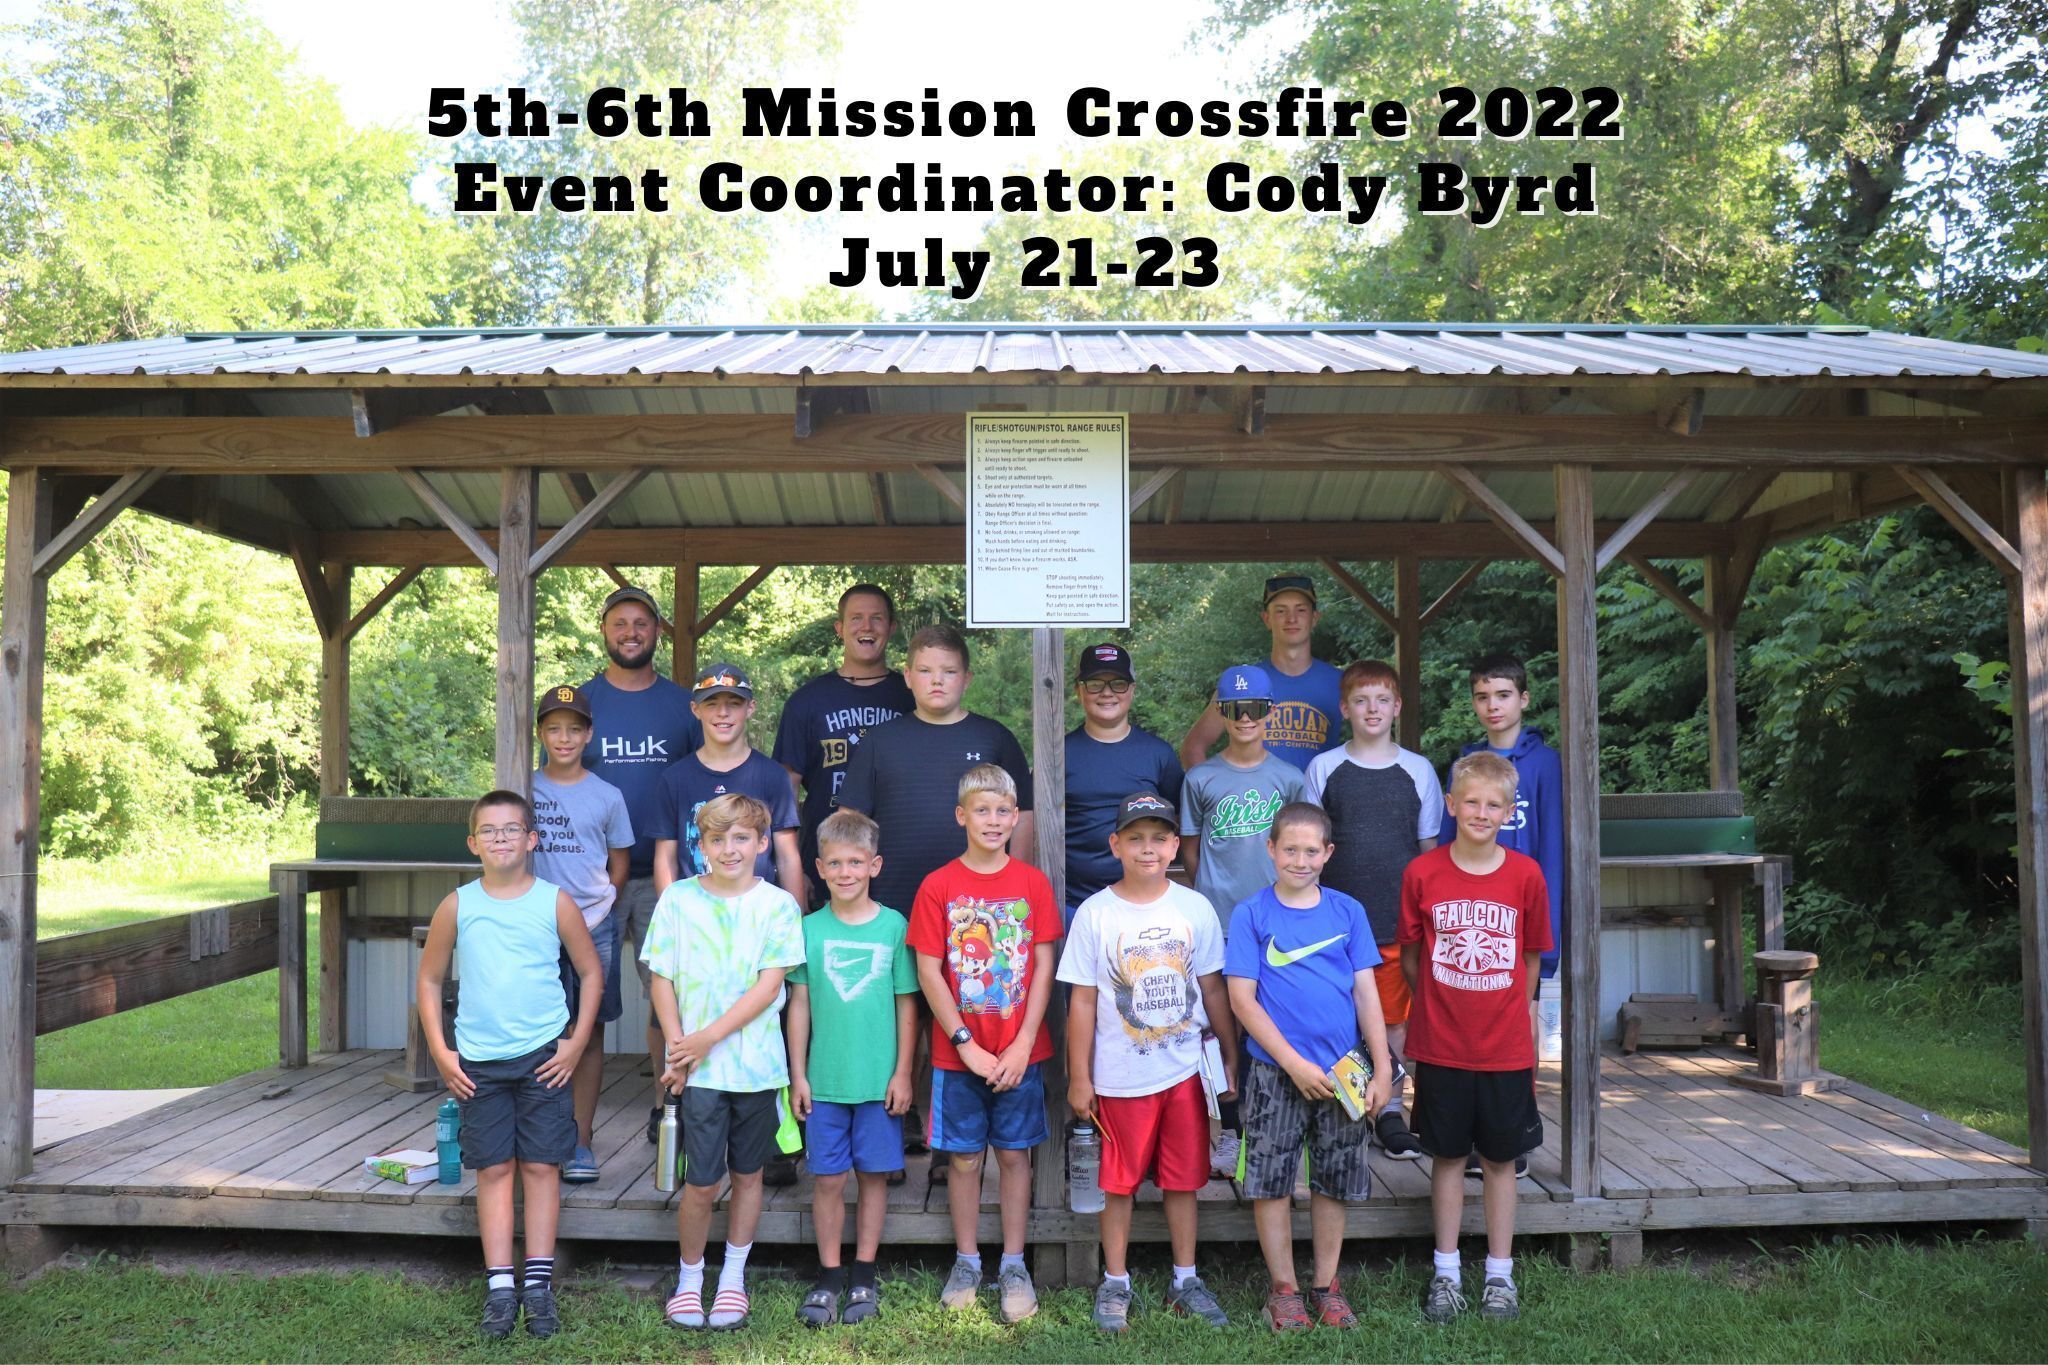 5th-6th Mission Crossfire 2022